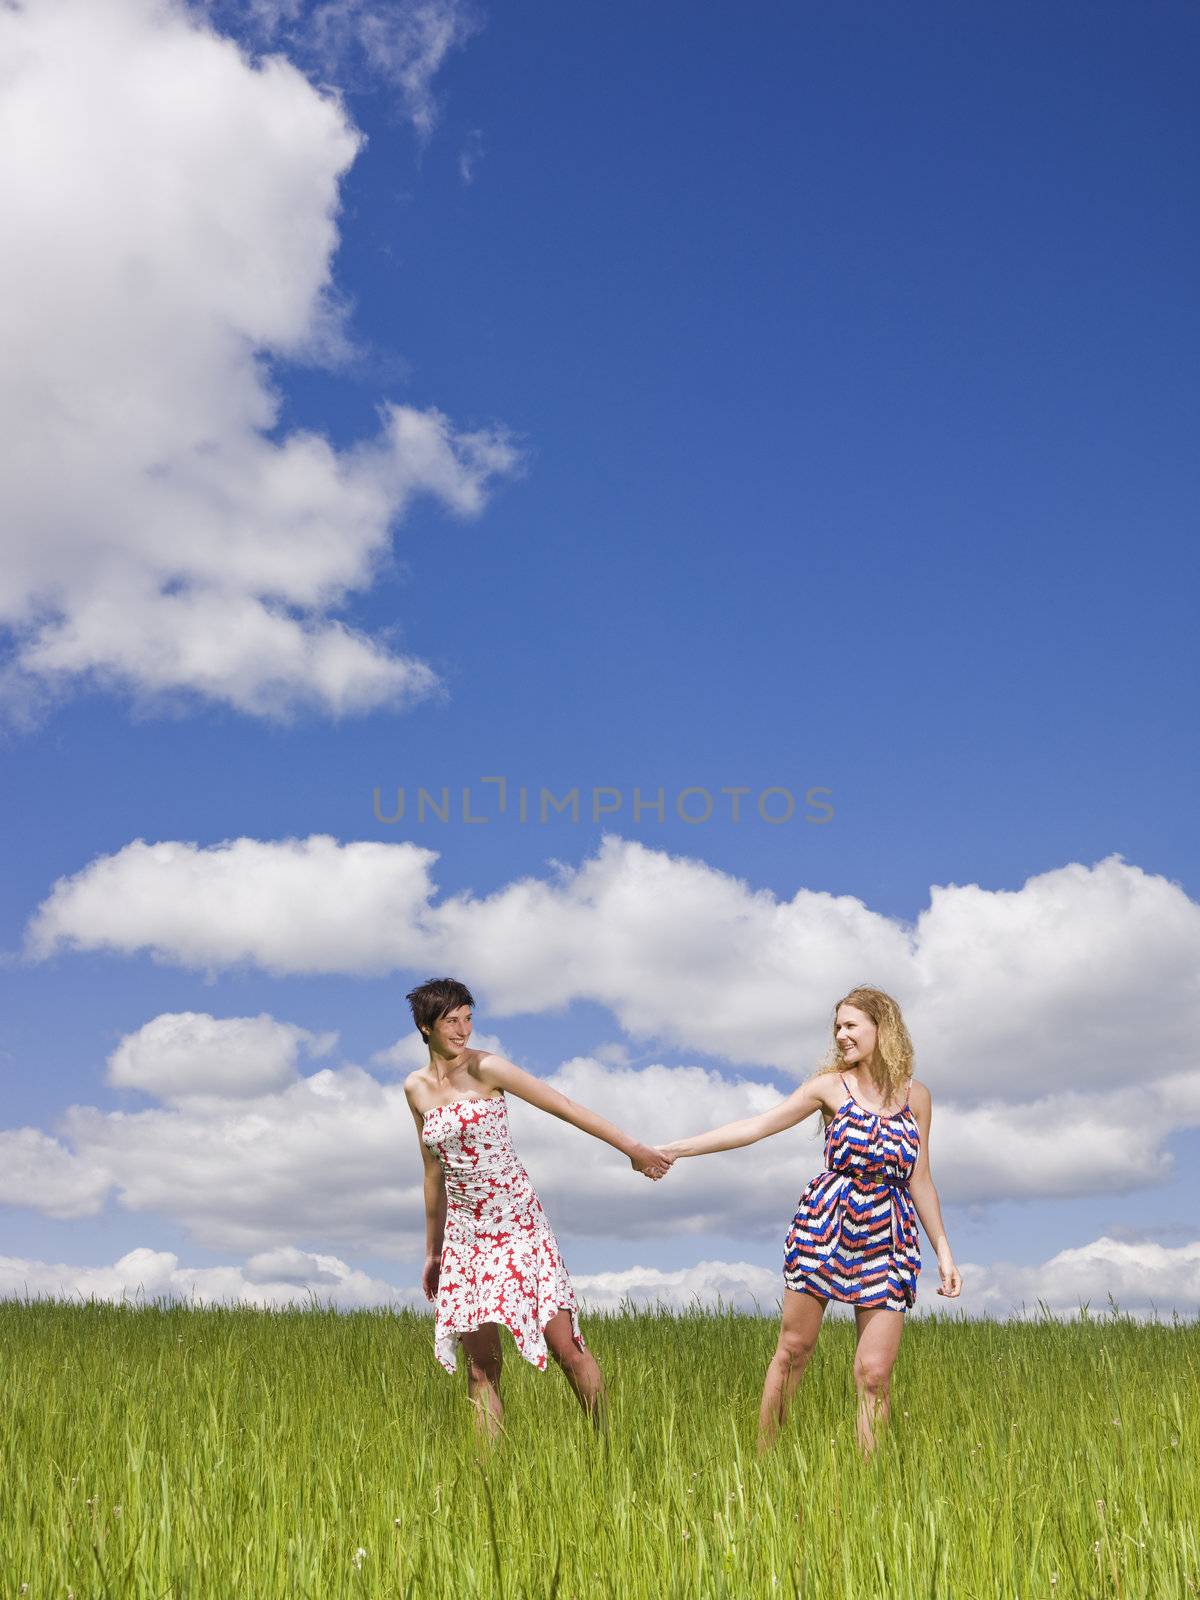 Two women holding hands on a field